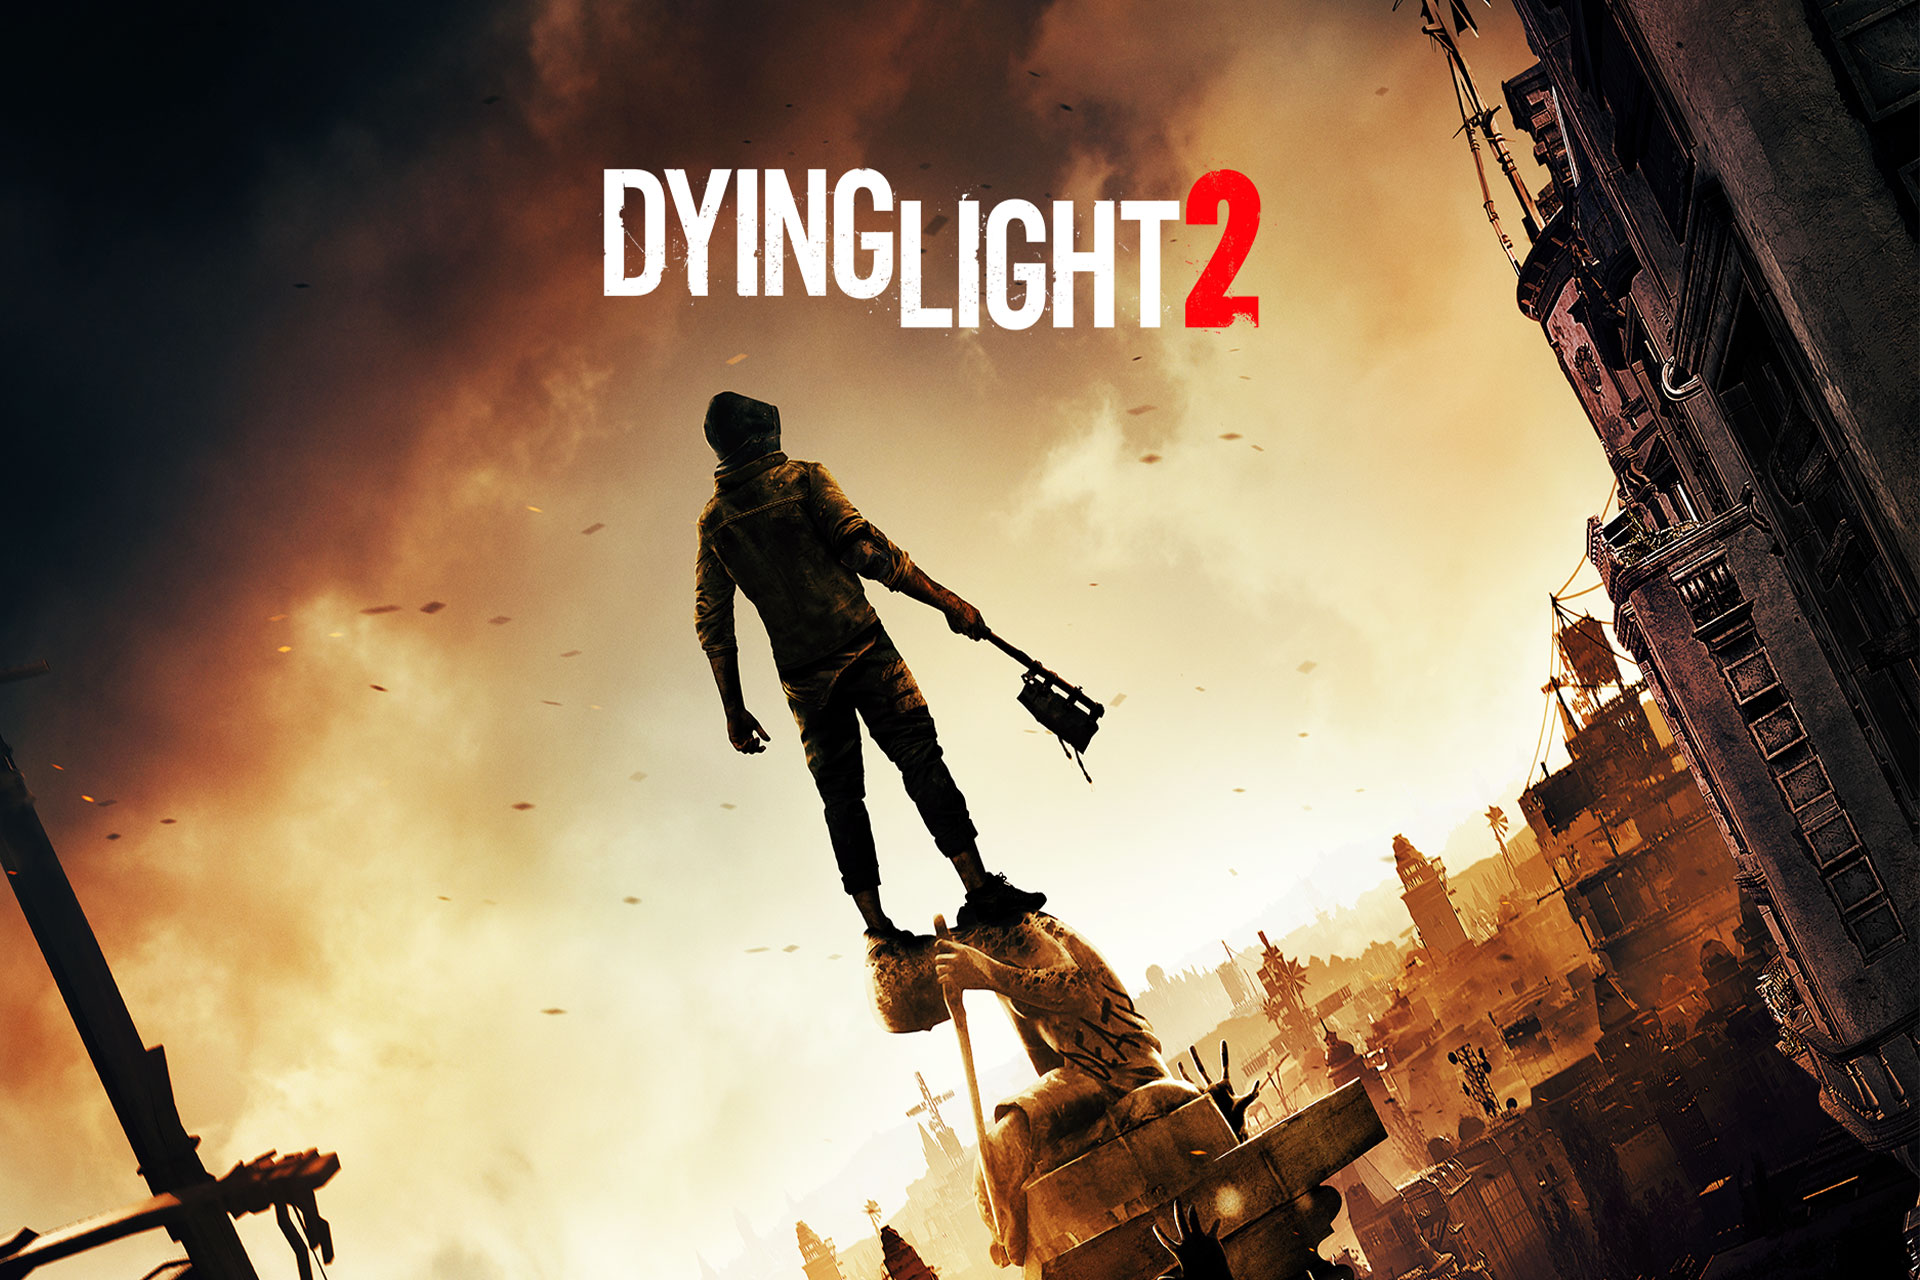 Fans are hoping this leaked image of Dying Light 2's Collector's 